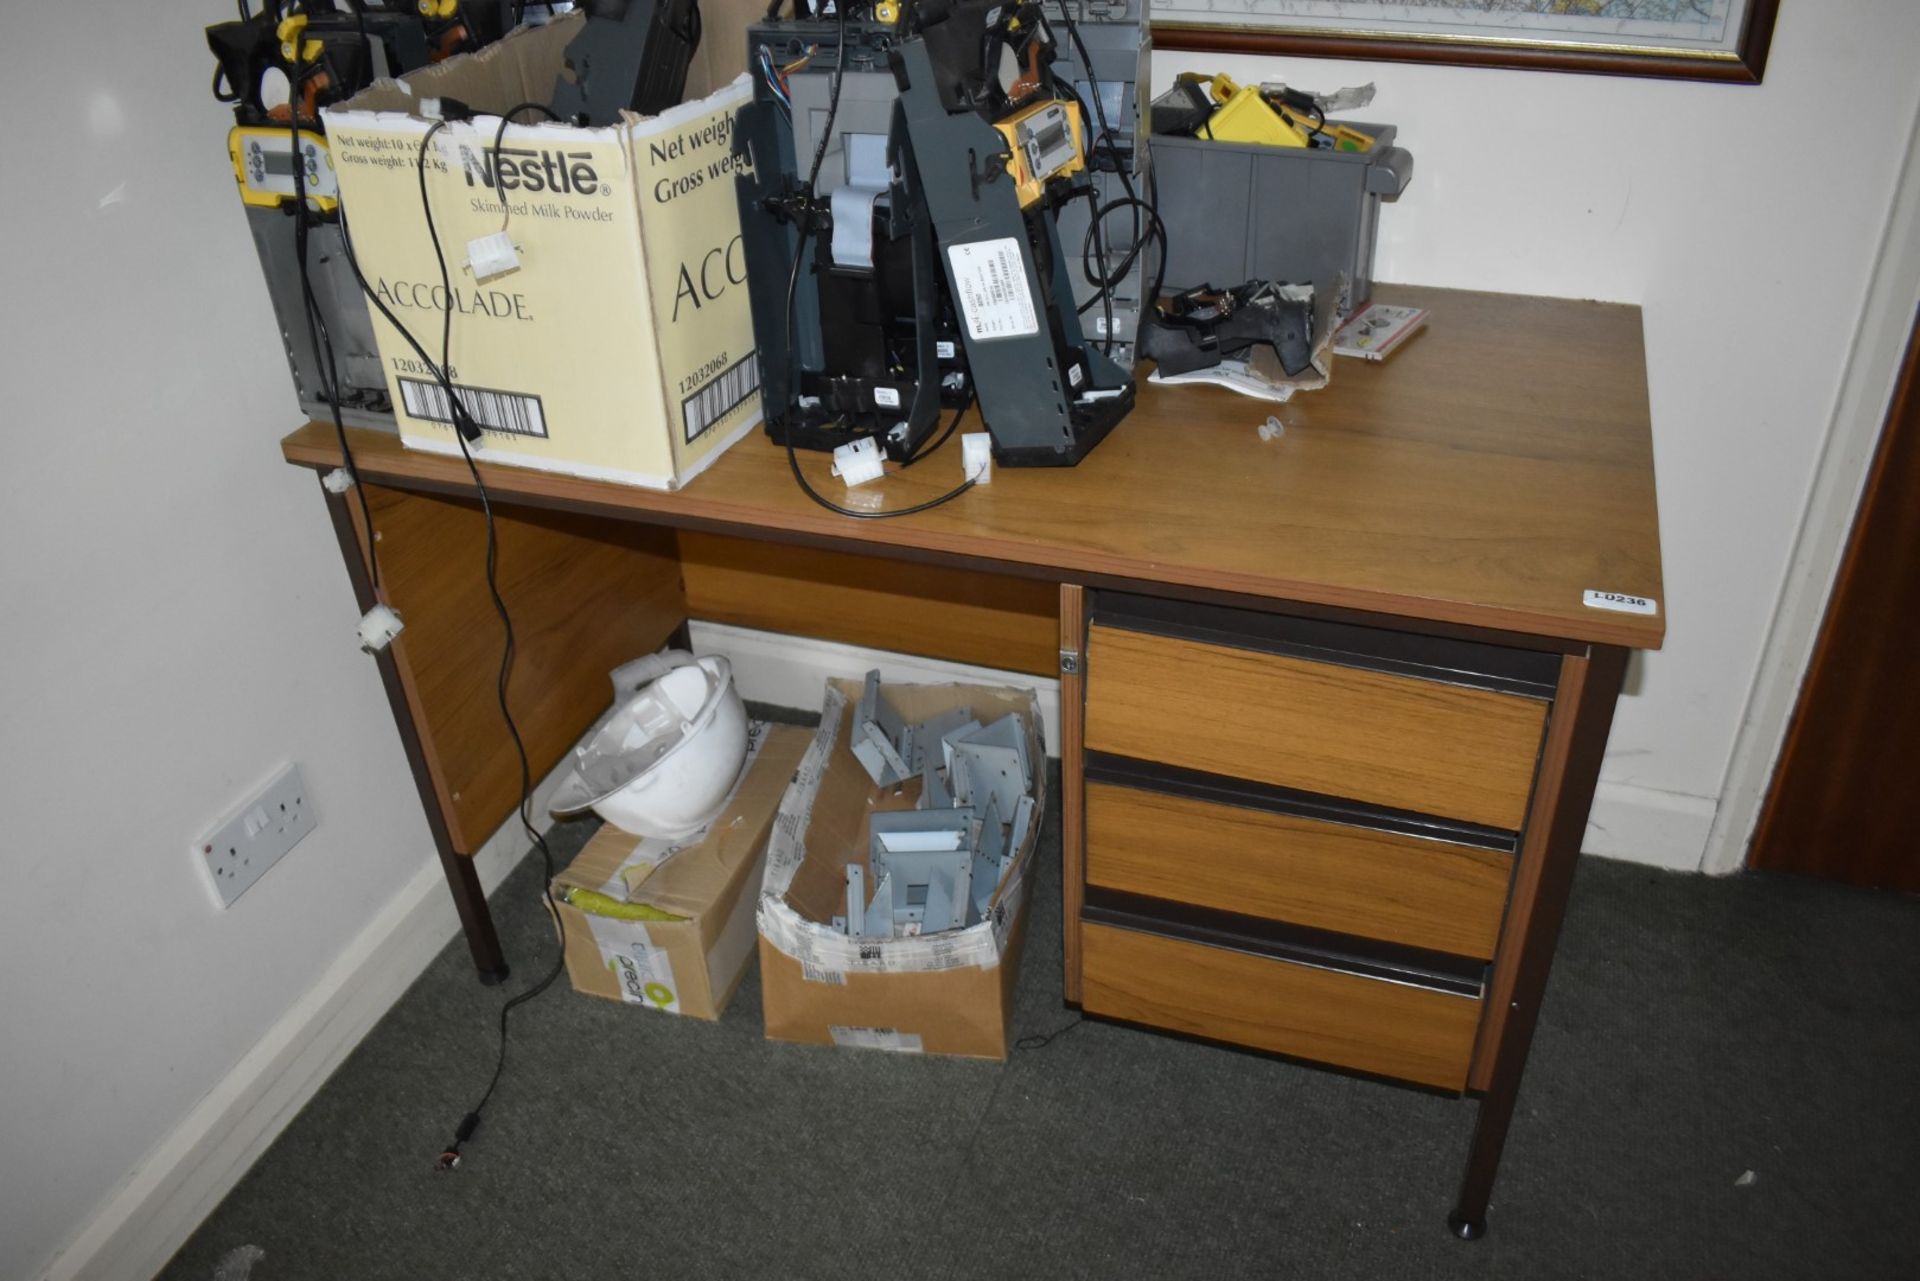 2 x Items of Office Furniture to Include 1 x Desk and 1 x 180cm Length Table - Ref LD238 D29? B2 - - Image 2 of 2